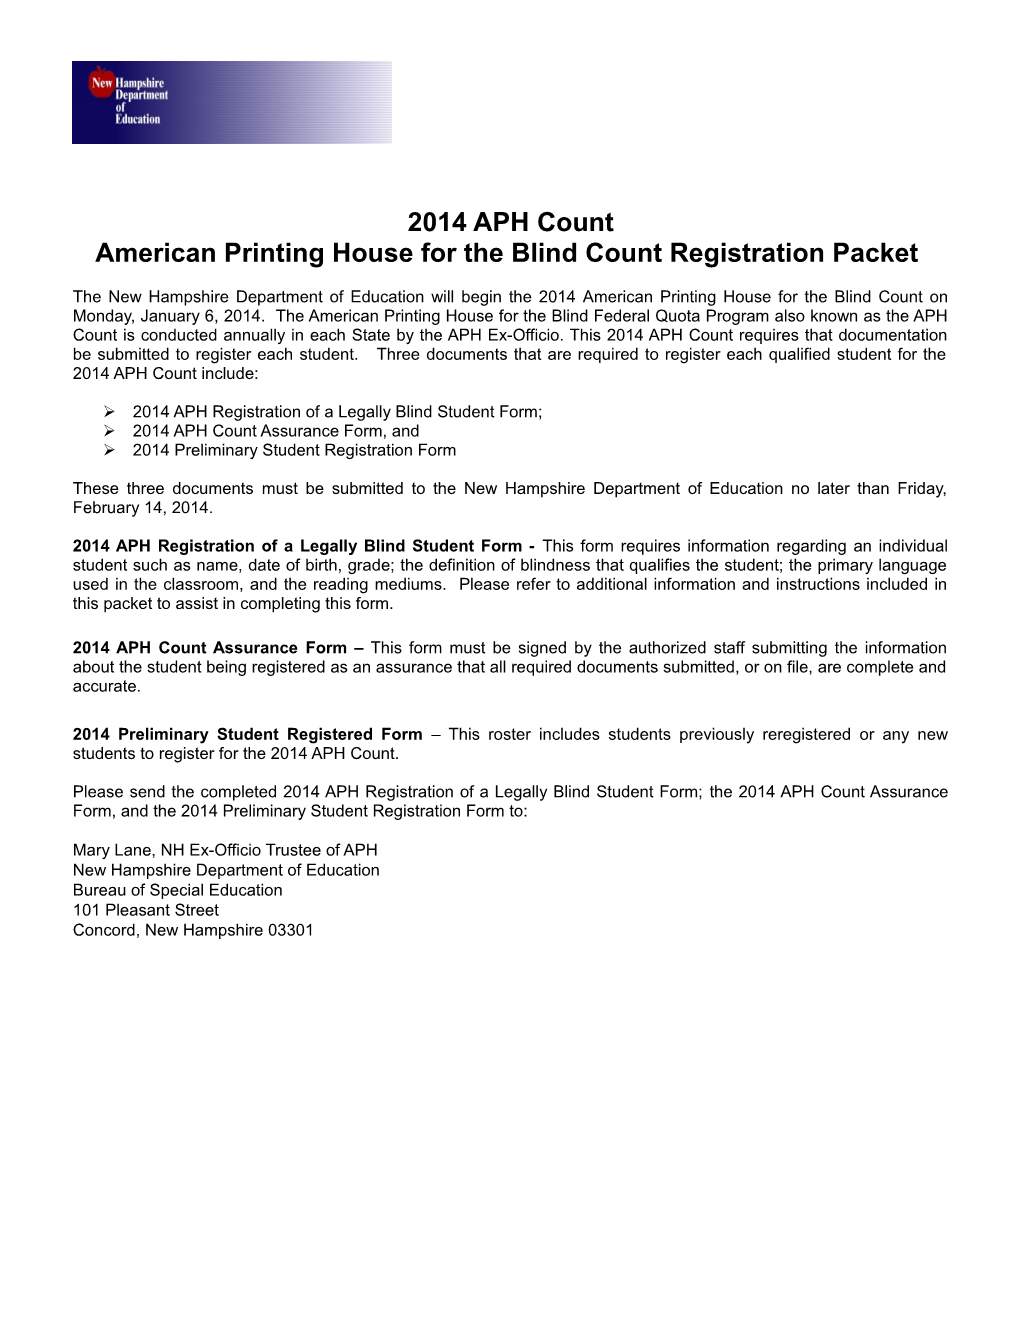 American Printing House for the Blind Count Registration Packet